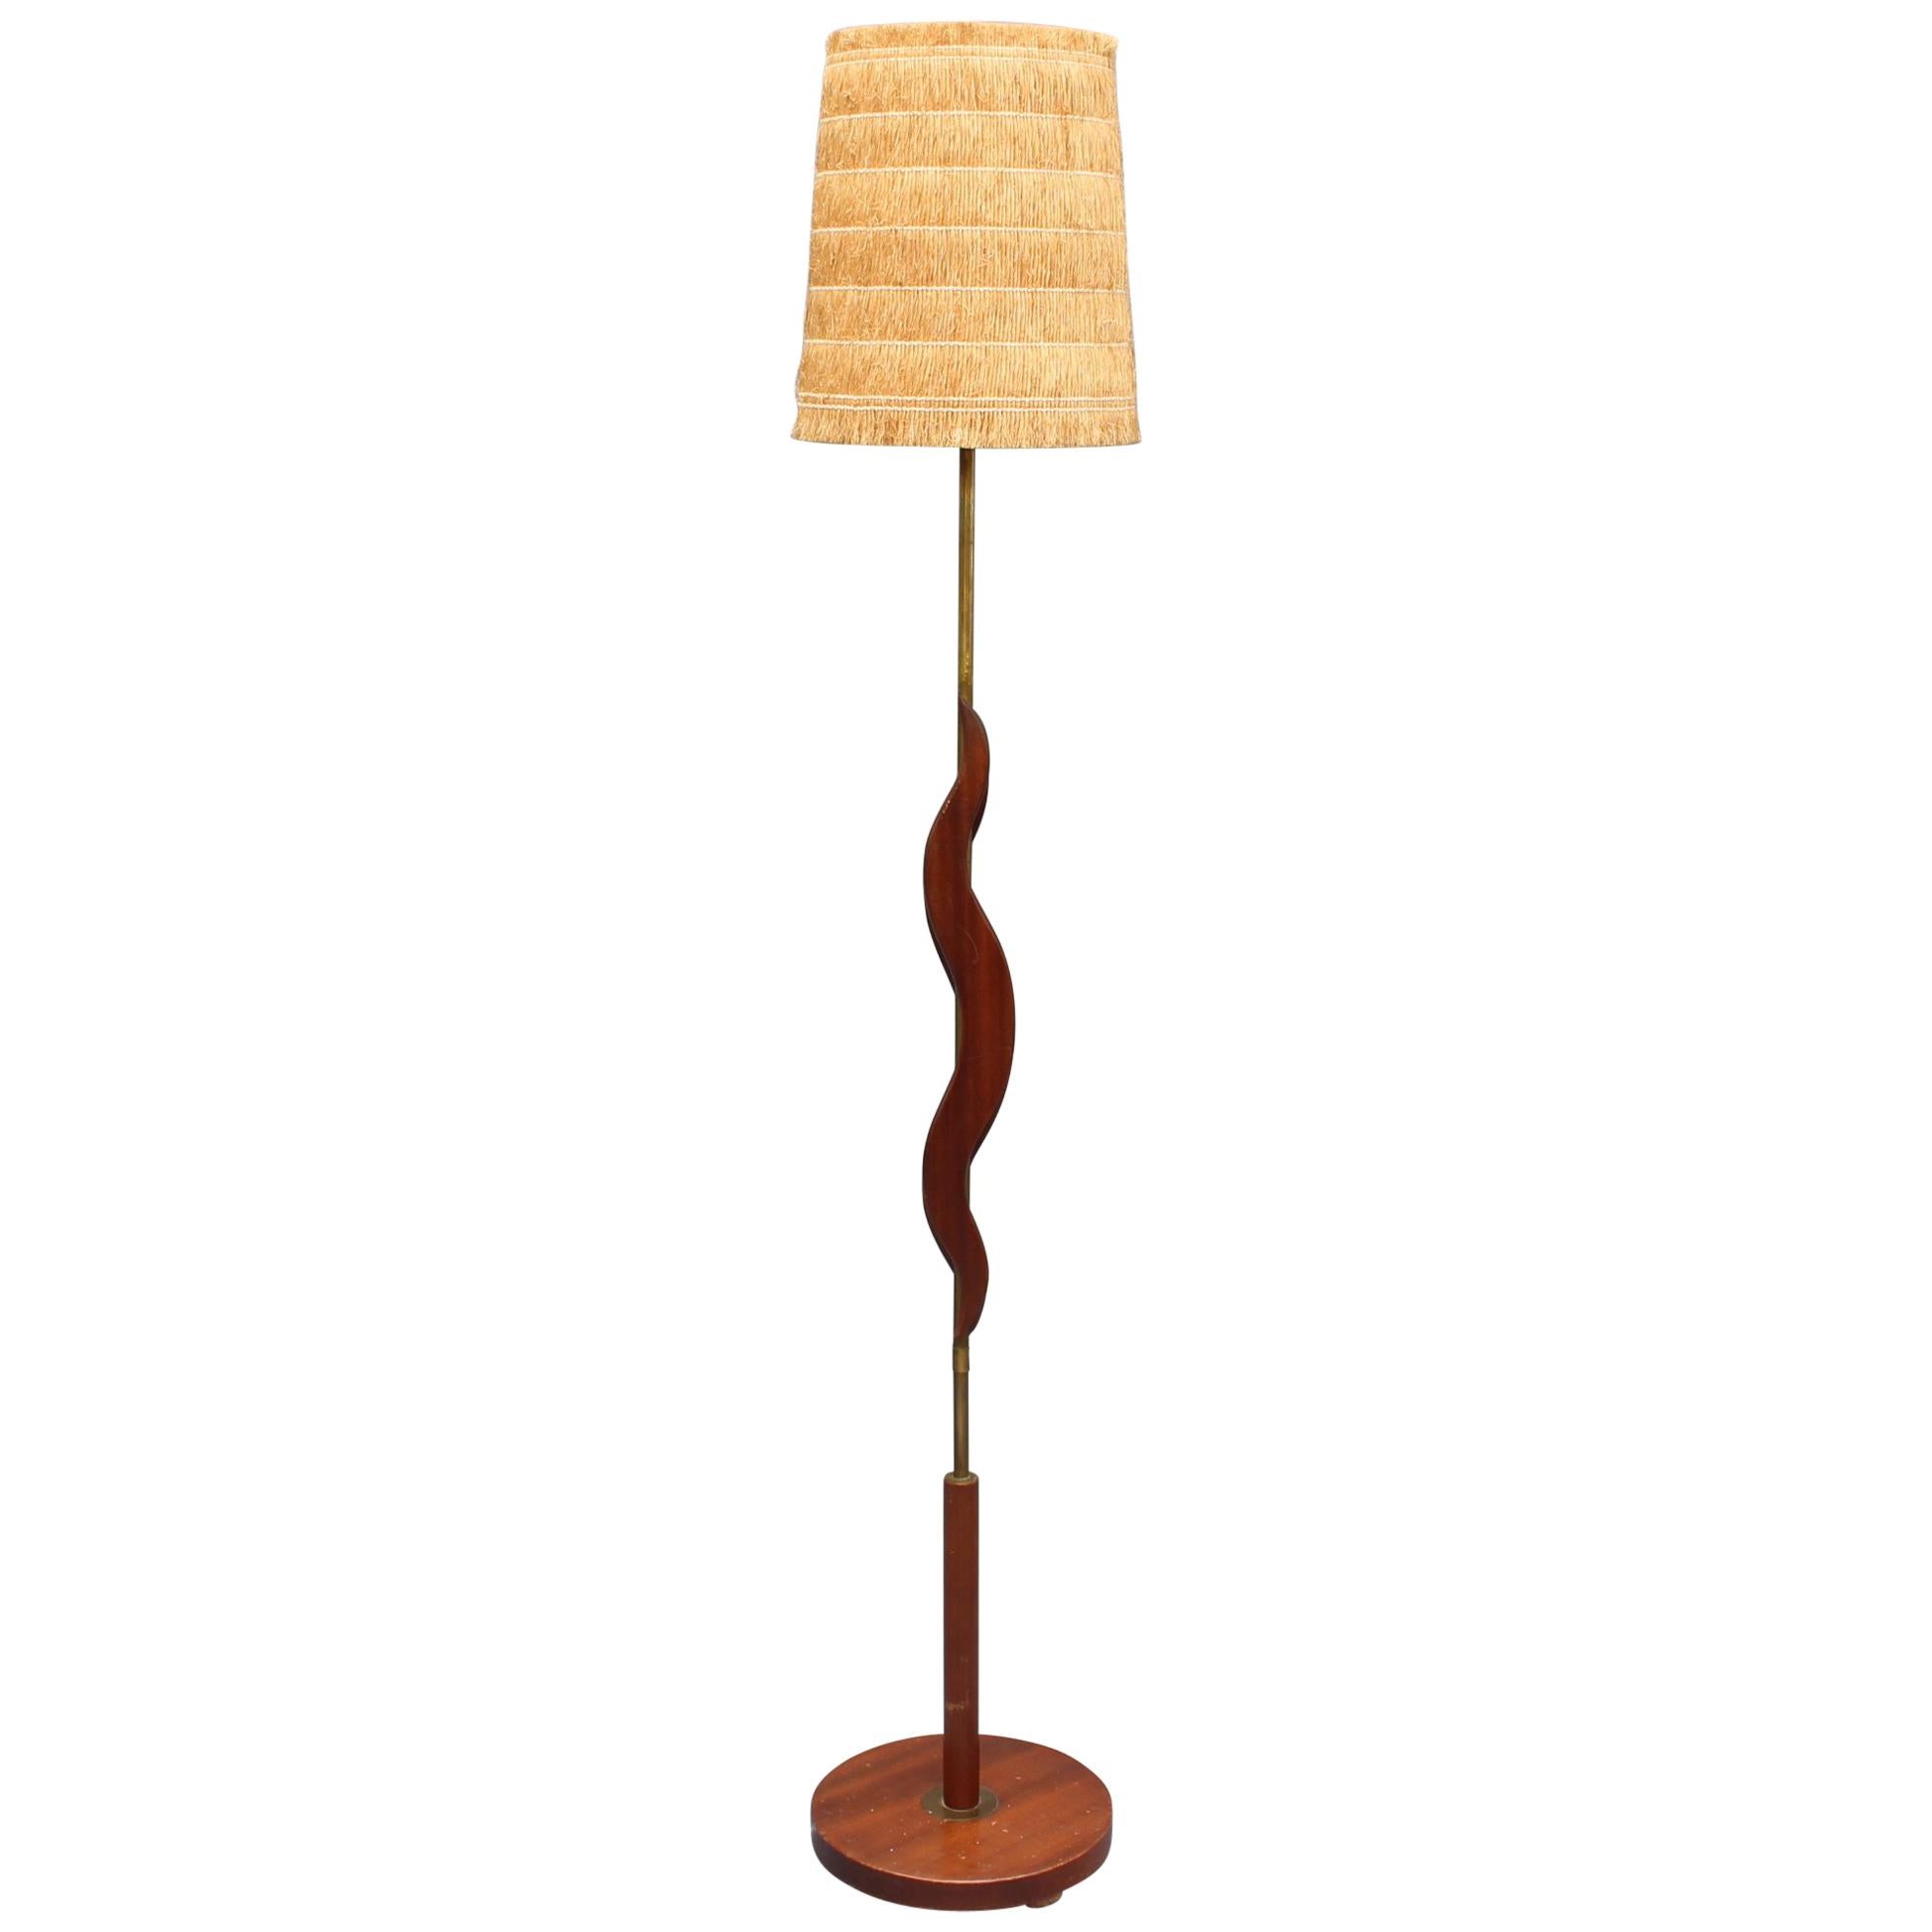 Midcentury French Wooden and Brass Floor Lamp, circa 1950s